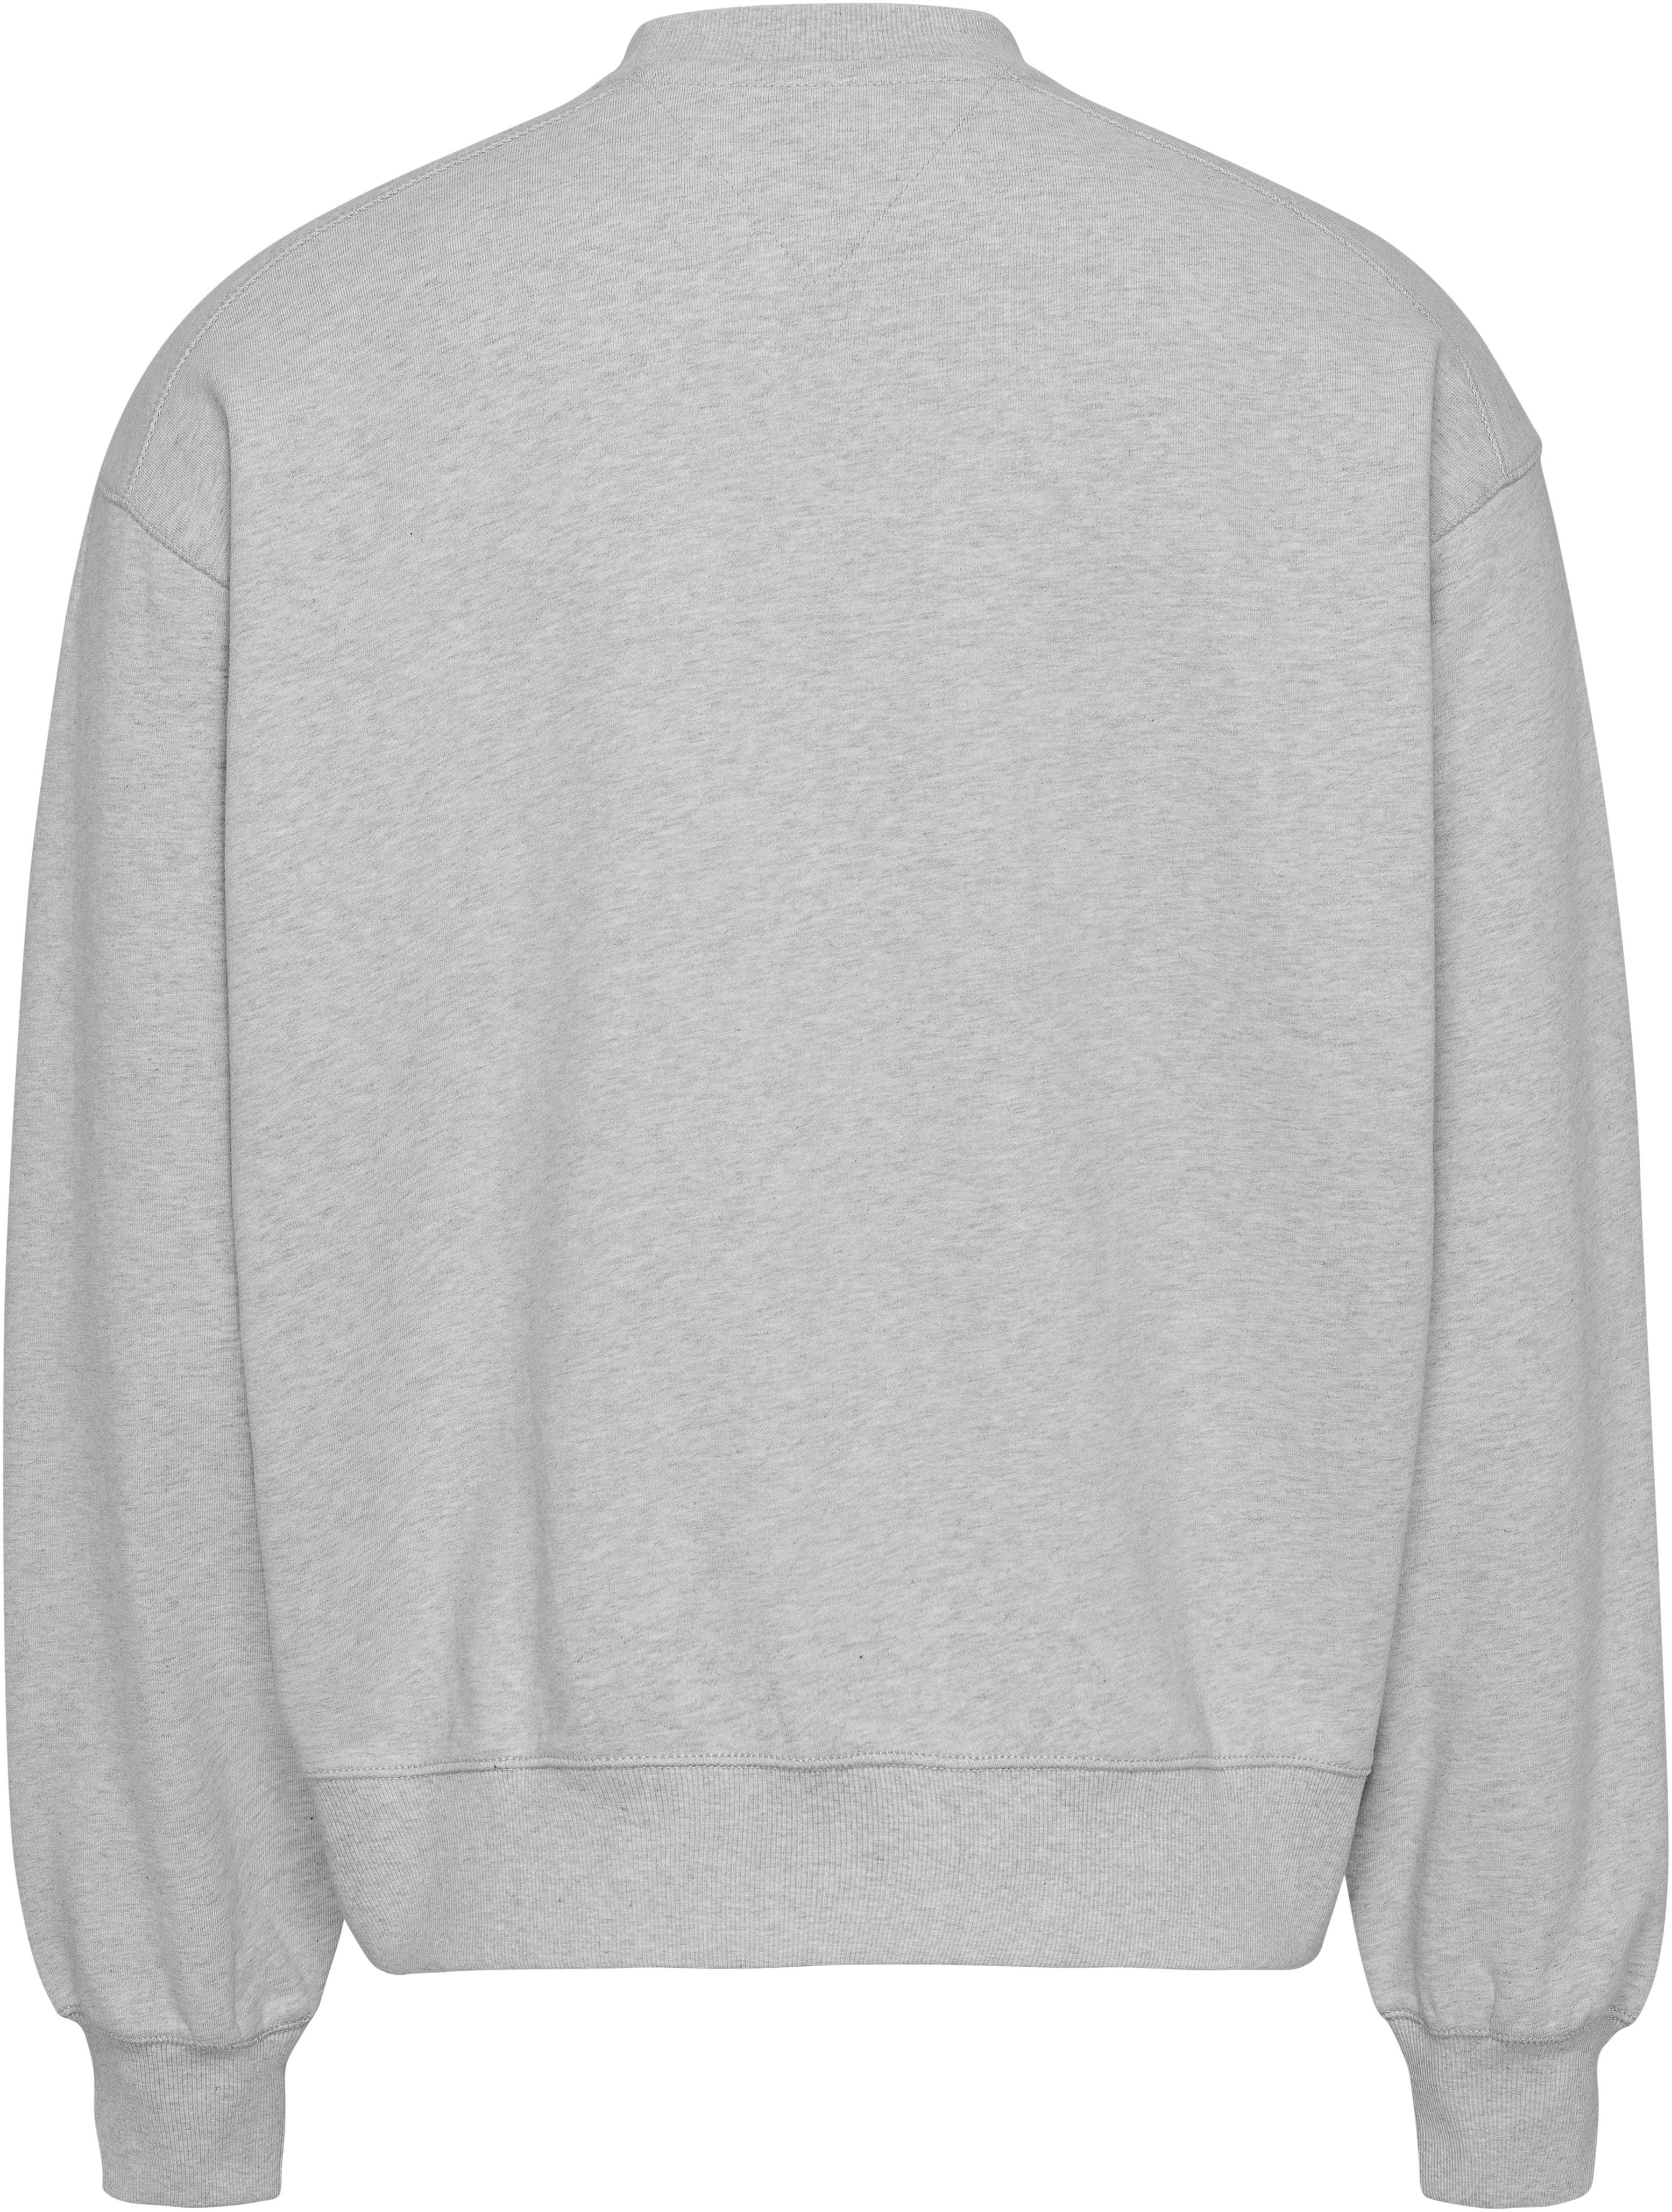 COLLEGE GRAPHIC Tommy CREW TJM BOXY Jeans Grey Silver Sweatshirt